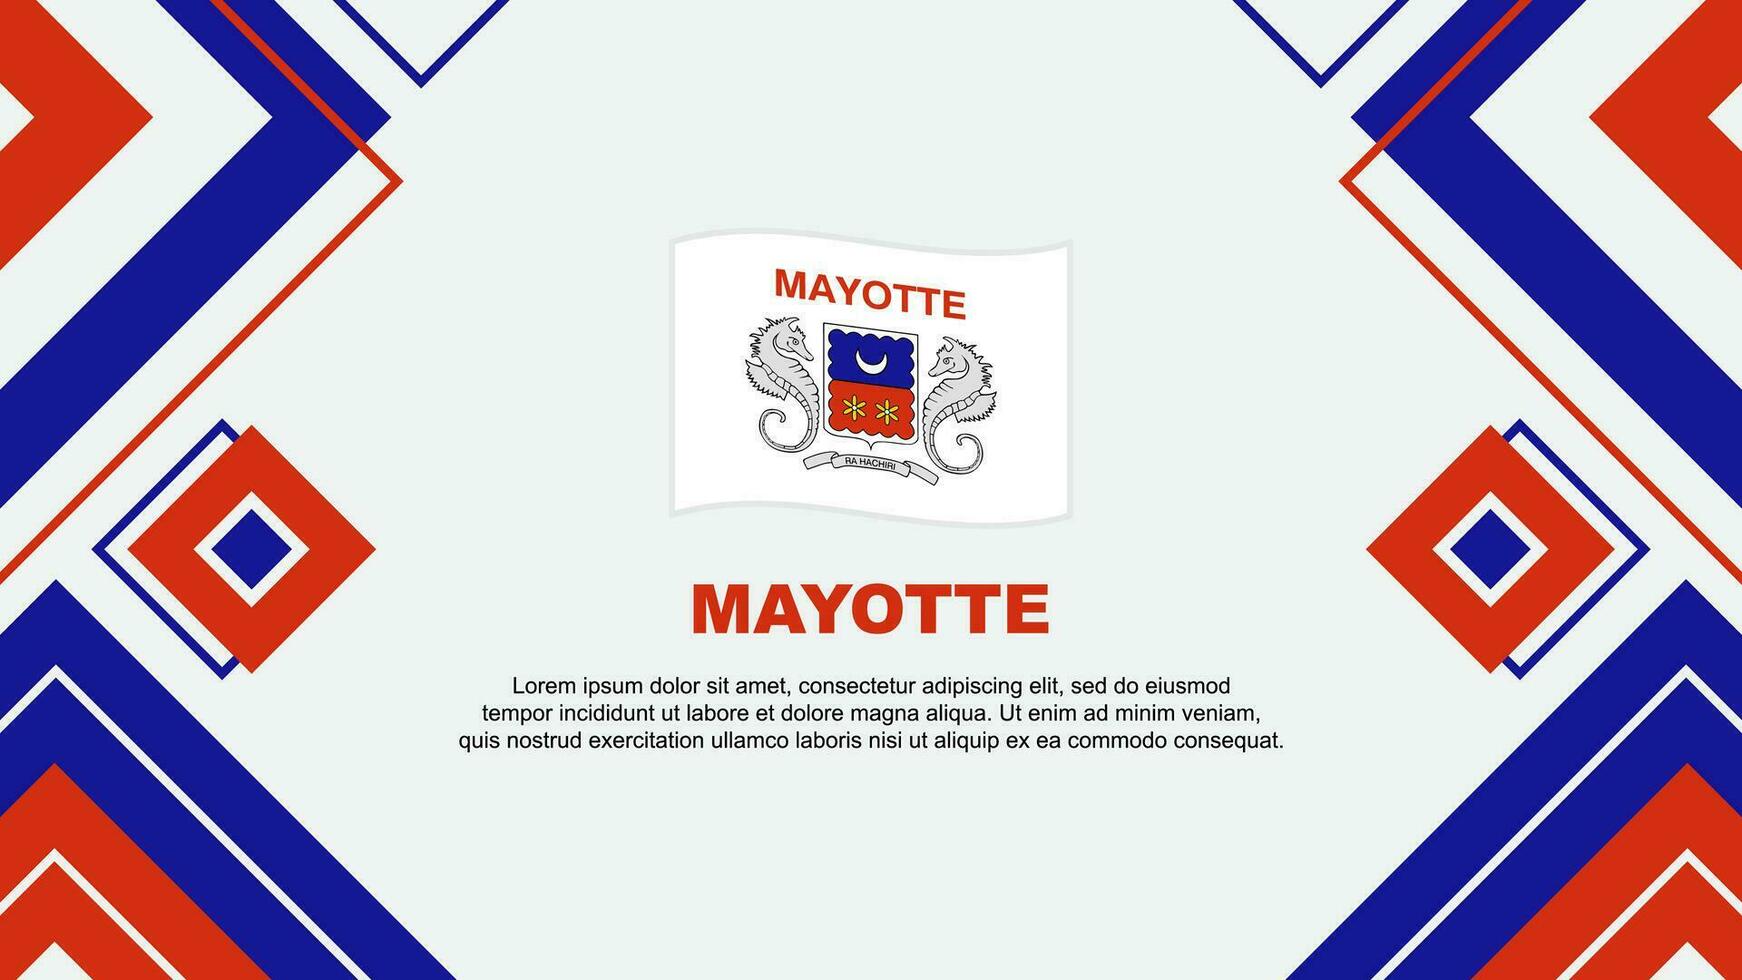 Mayotte Flag Abstract Background Design Template. Mayotte Independence Day Banner Wallpaper Vector Illustration. Mayotte Background